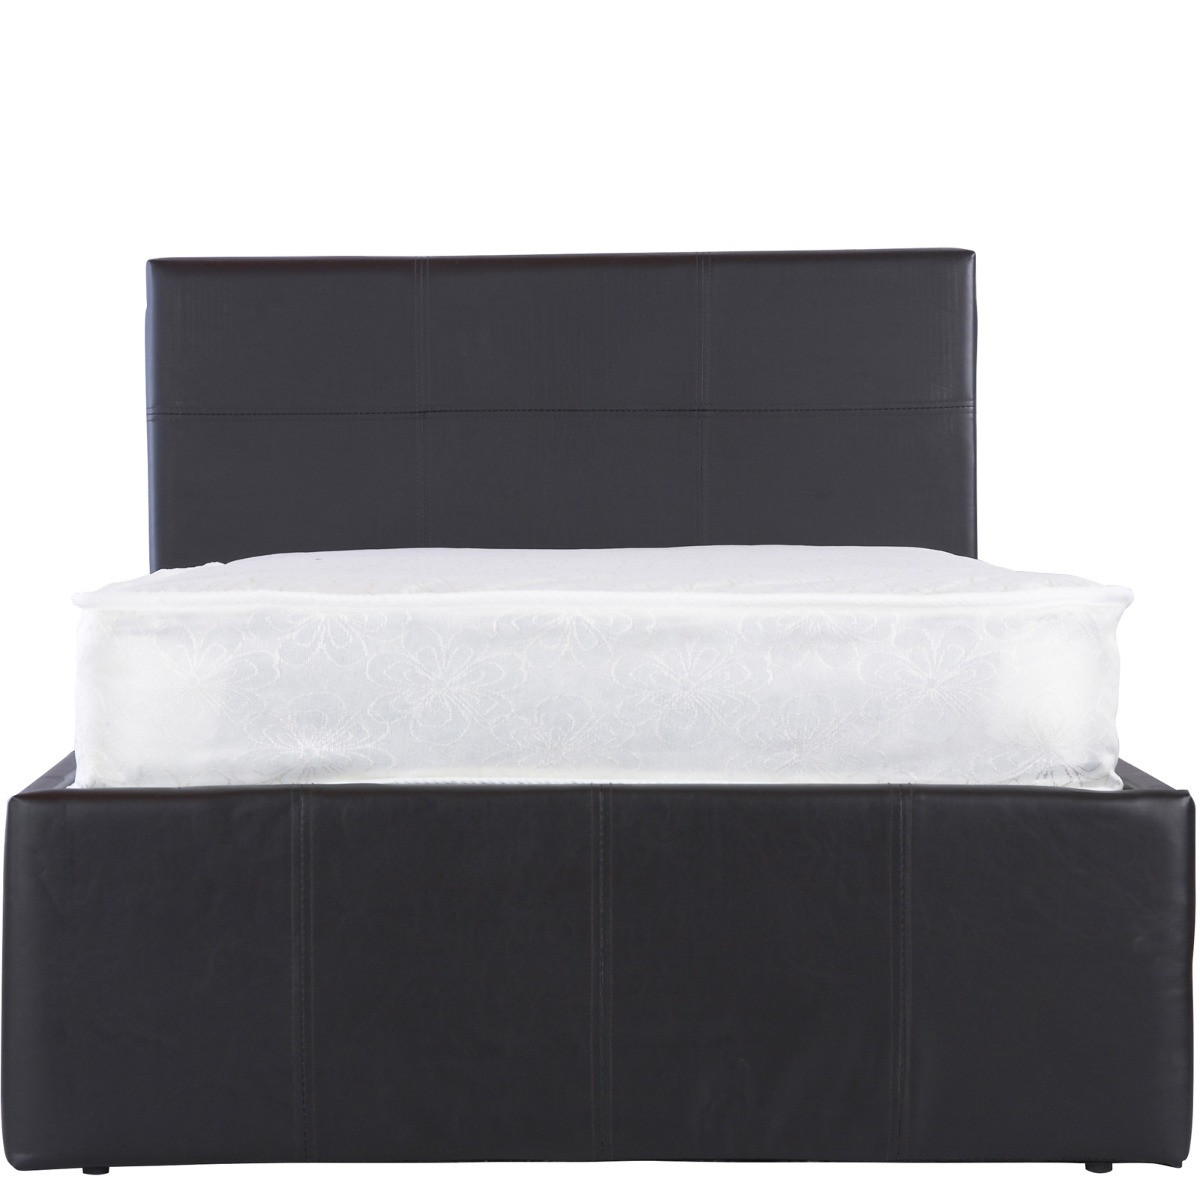 Side Lift Ottoman Storage Bed, 4ft 6 Double - Black>